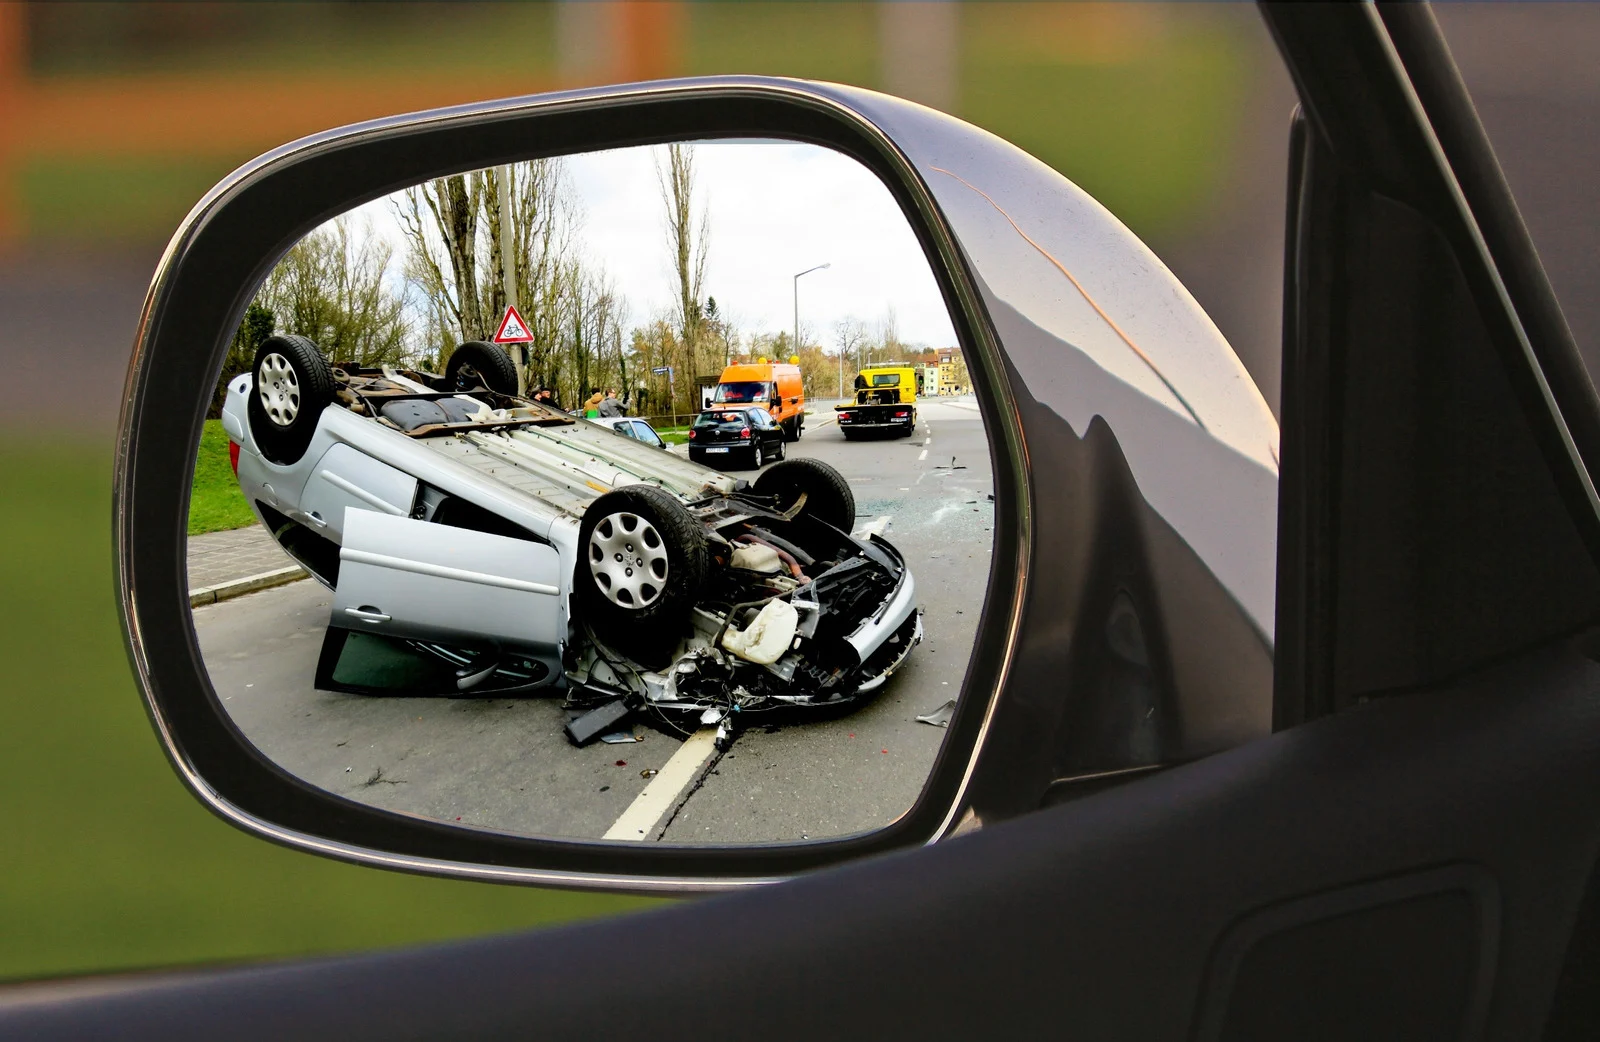 Car accident on mirror